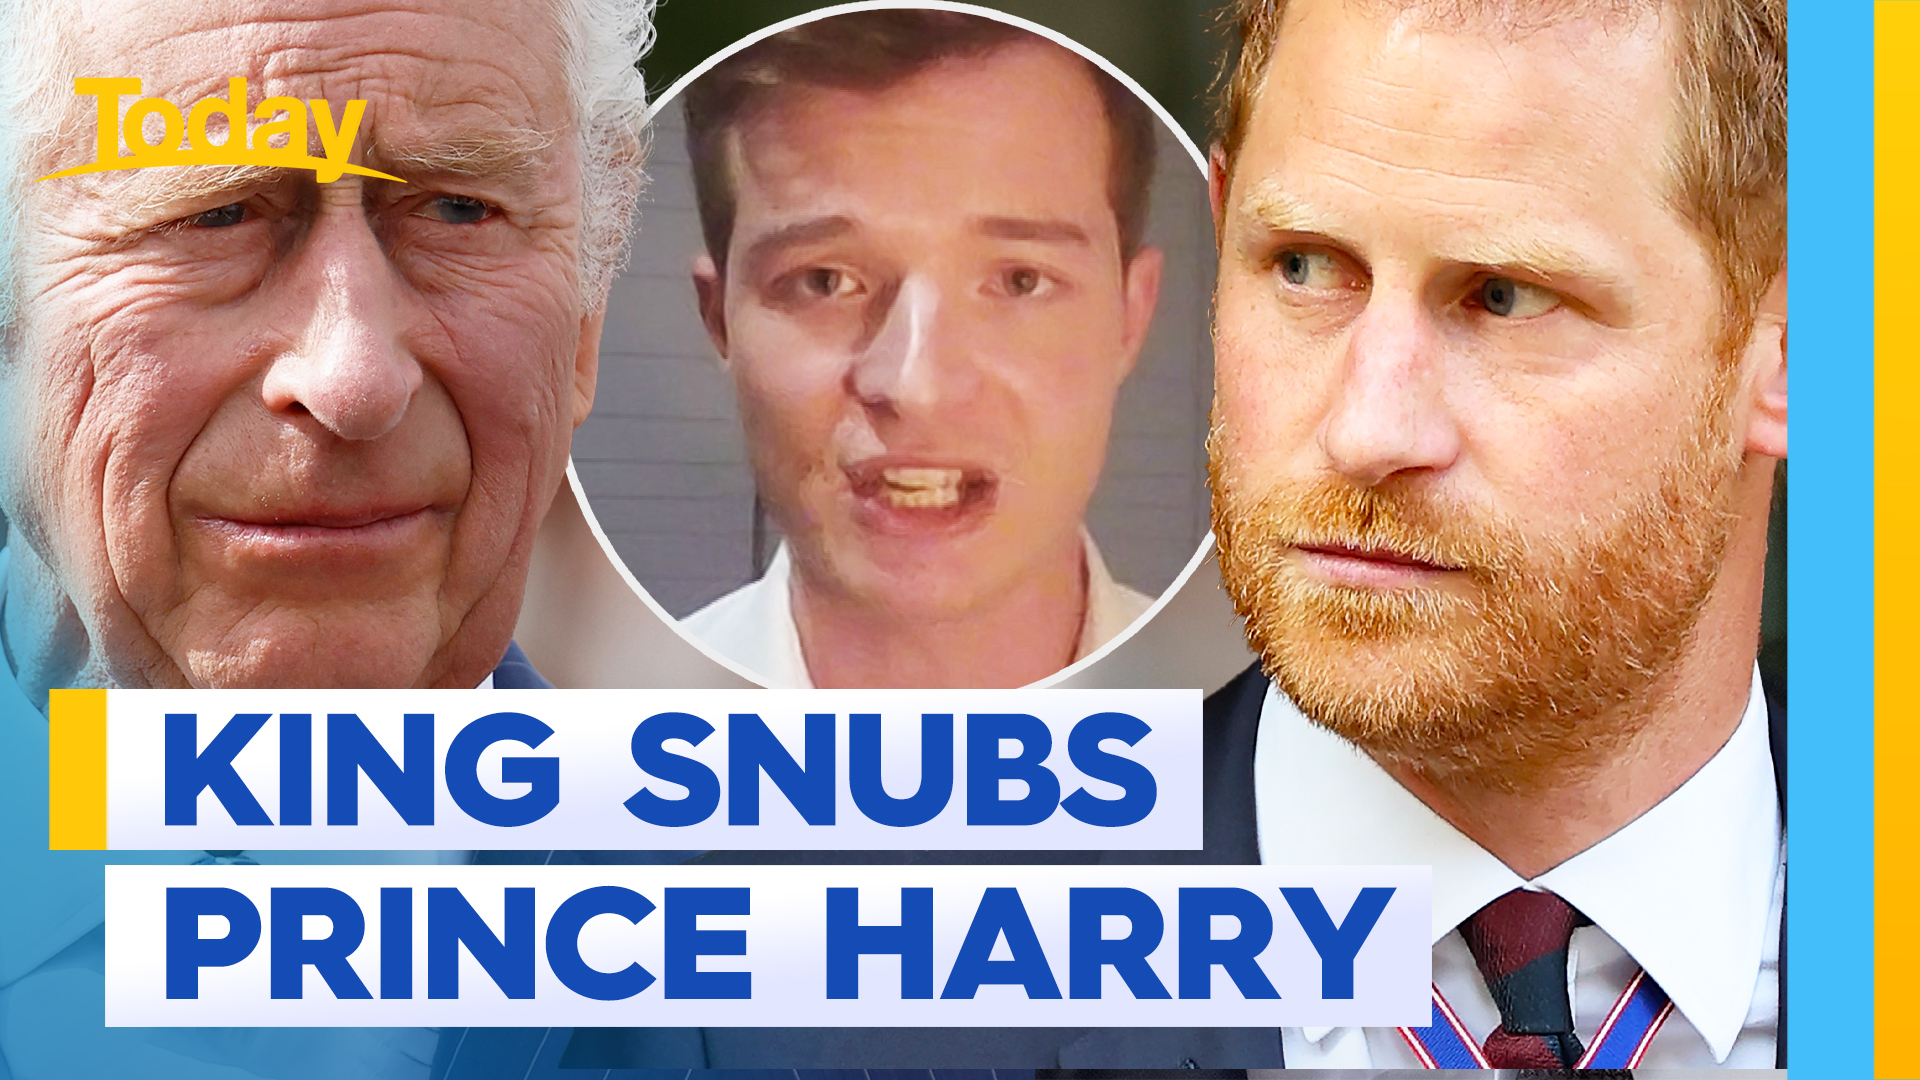 King Charles chooses garden party over visit with Harry